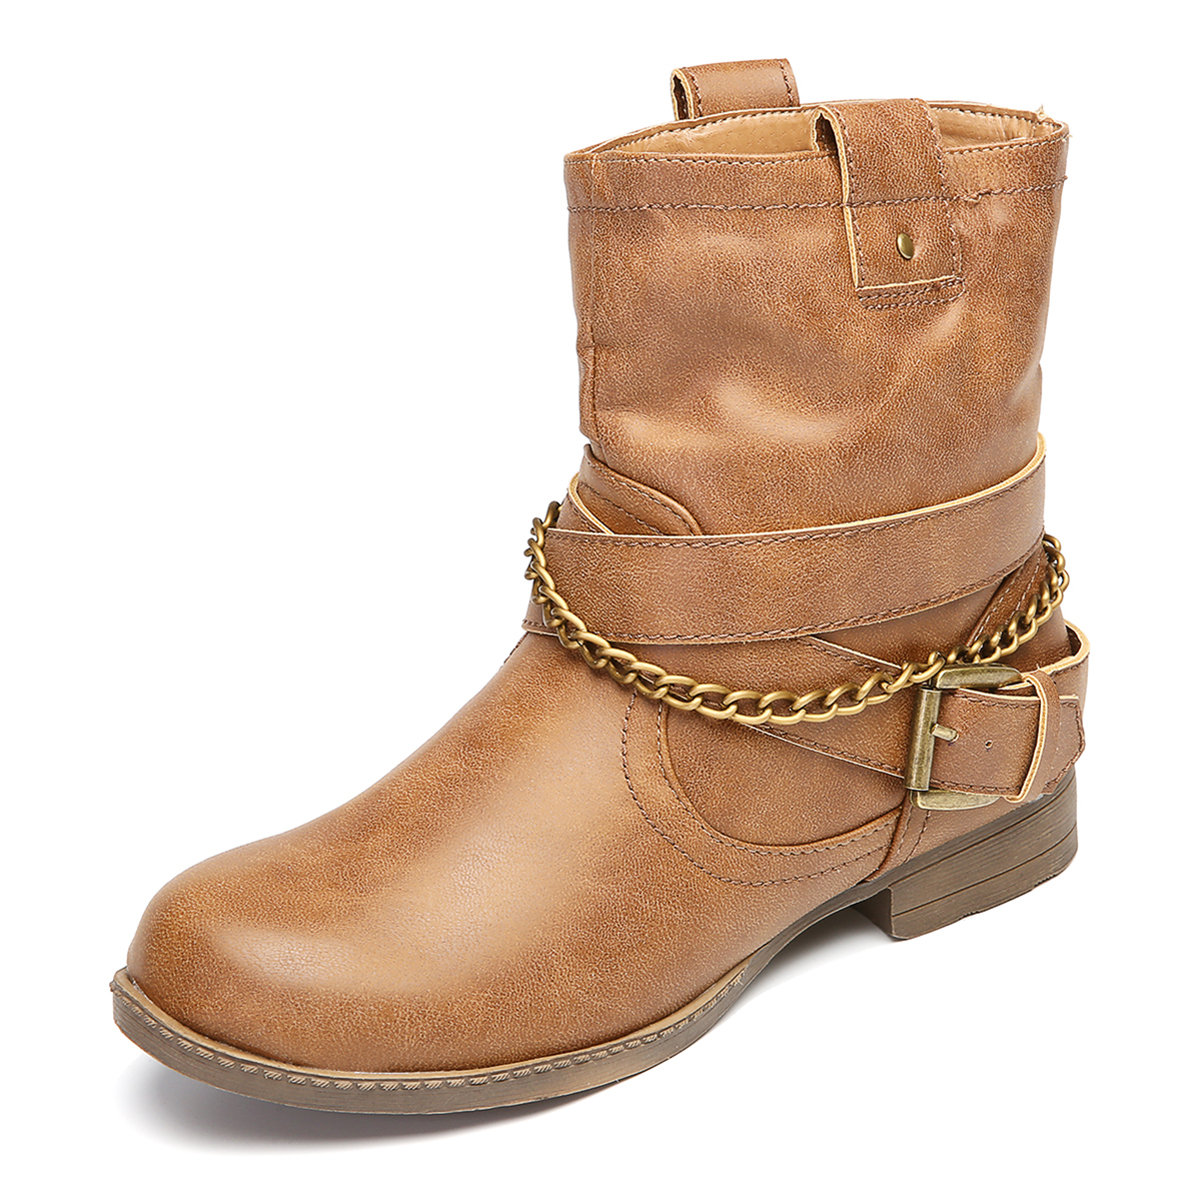 Metal Decoration Chains Slip On Casual Brown Boots